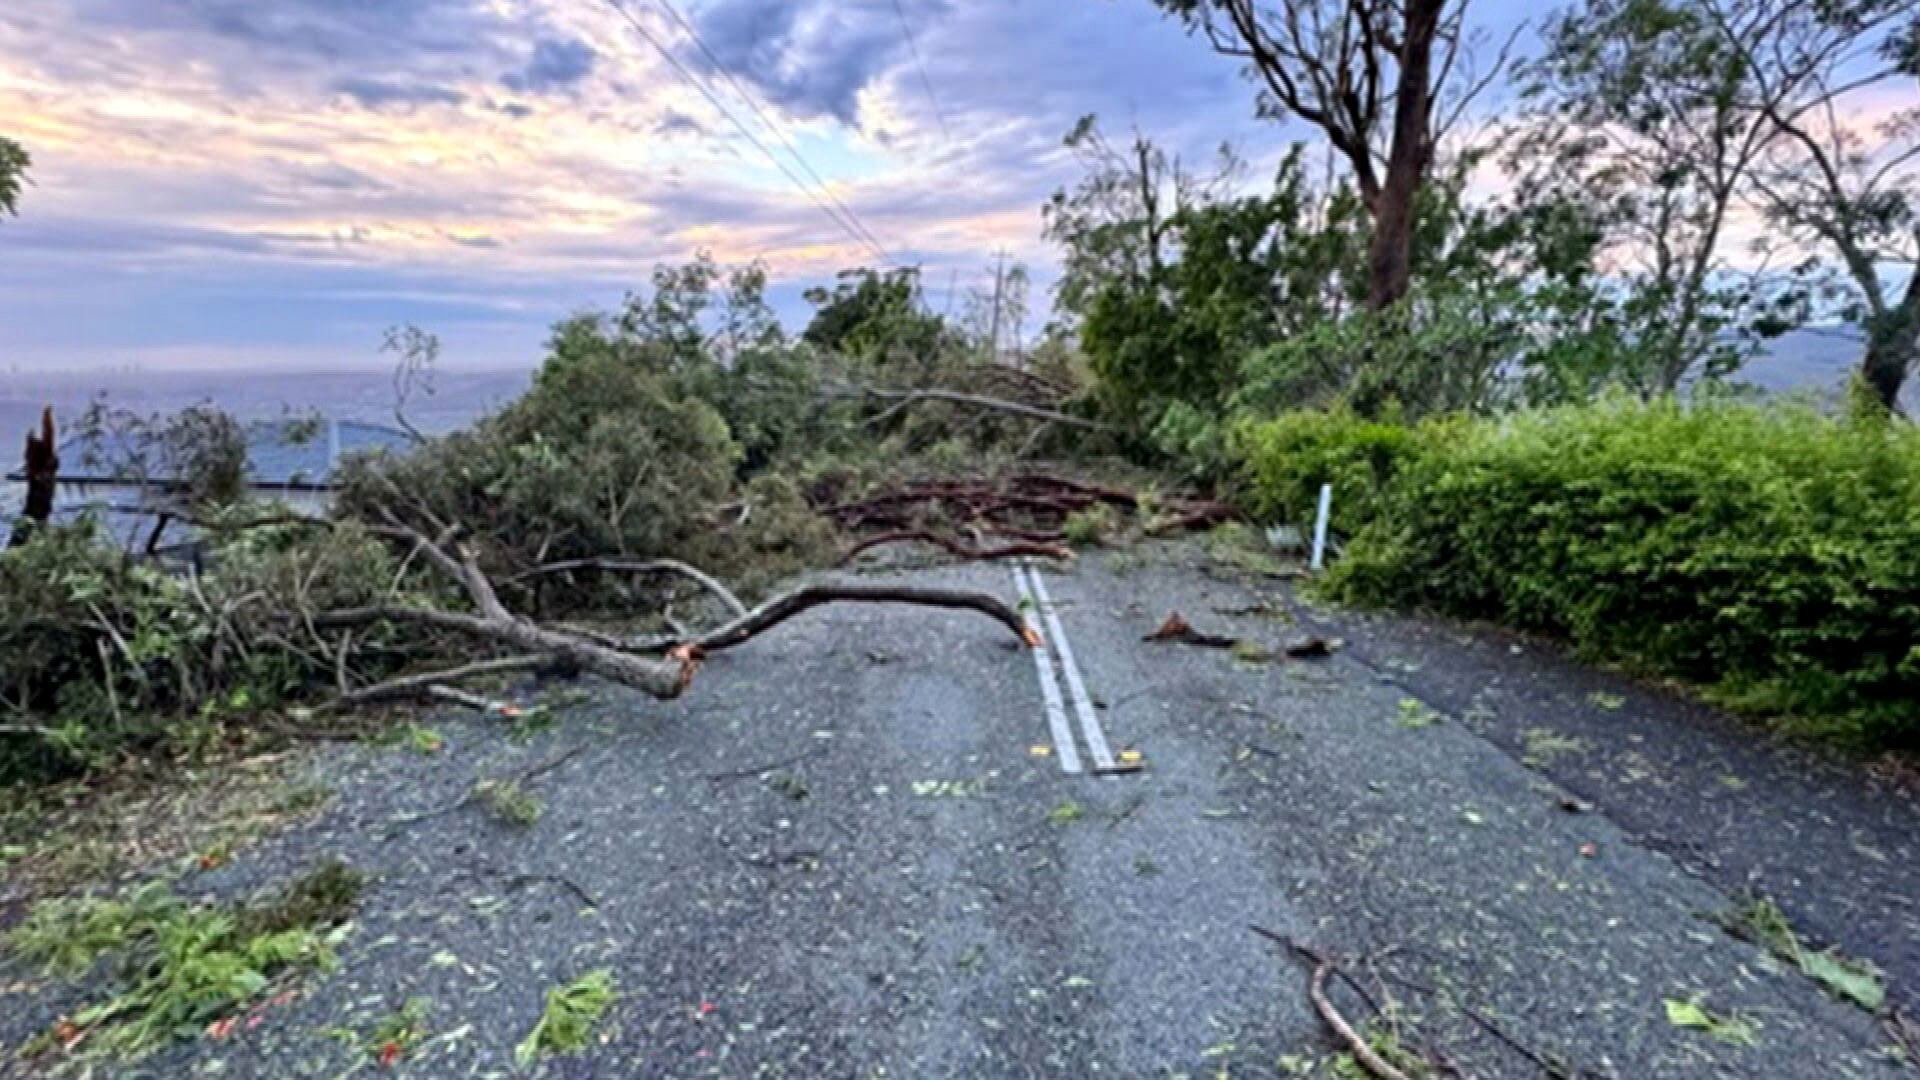 Tornado-like winds ripped out trees and knocked down power lines in south-east Queensland